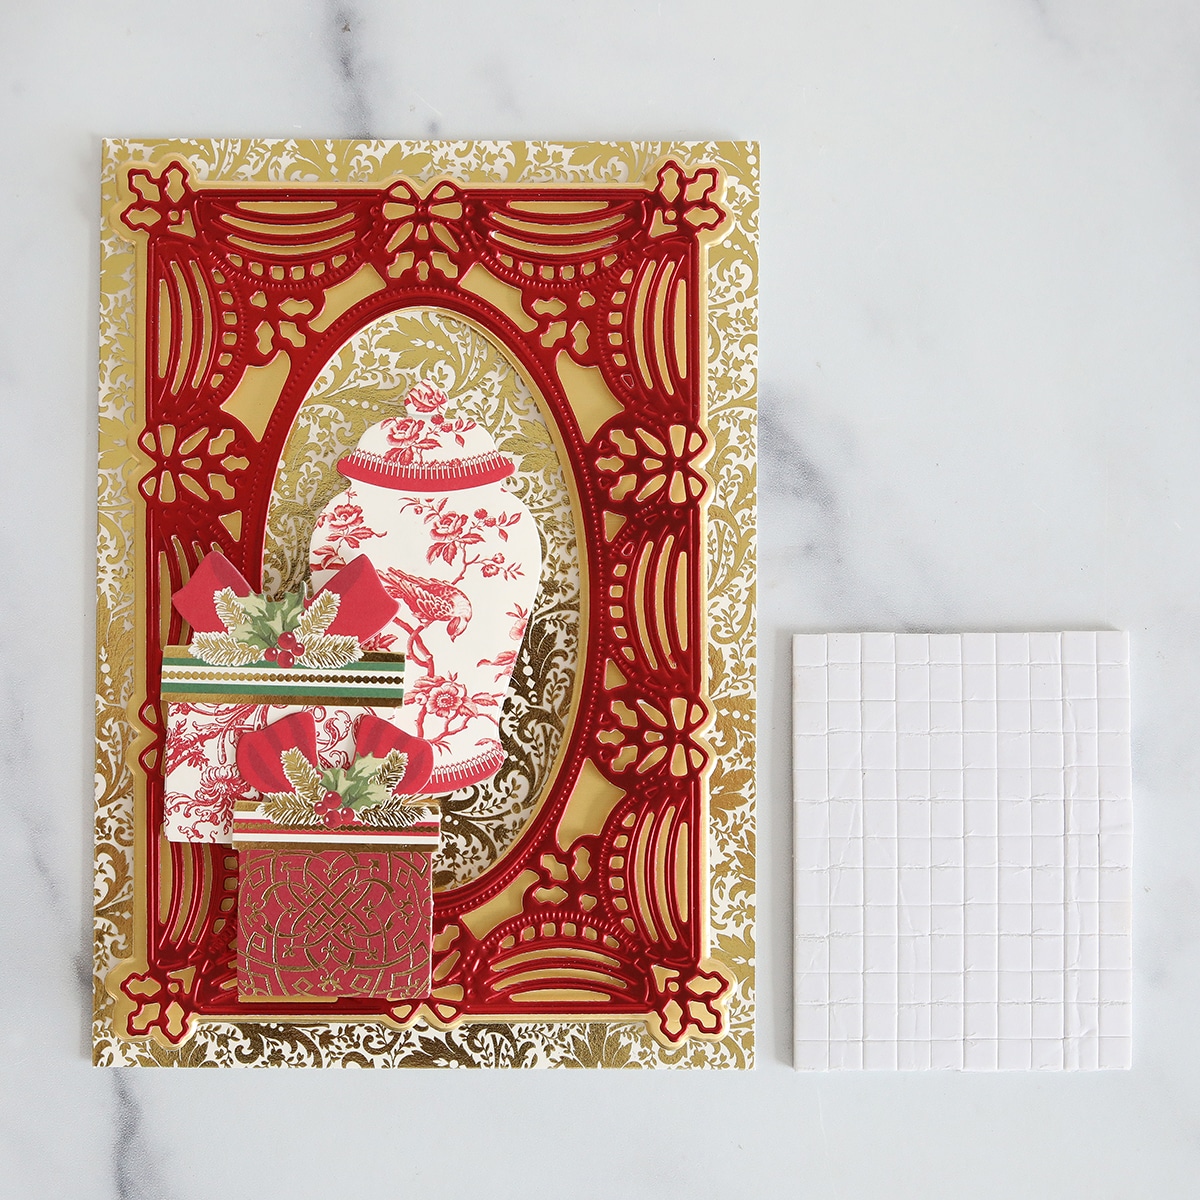 A christmas card with a red and gold design.